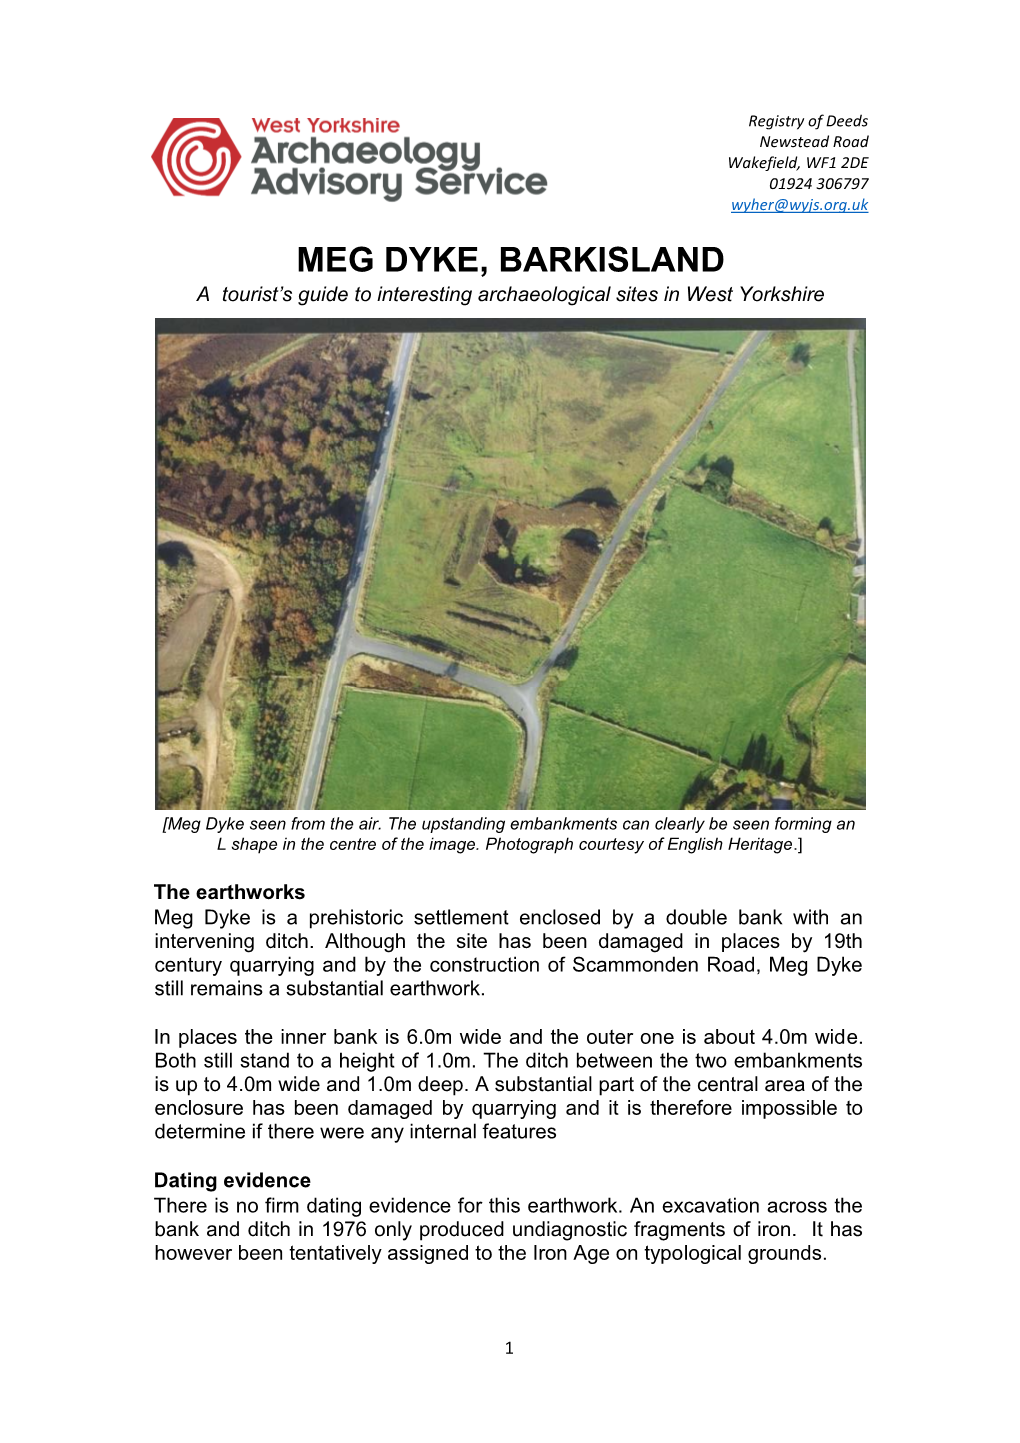 MEG DYKE, BARKISLAND a Tourist’S Guide to Interesting Archaeological Sites in West Yorkshire